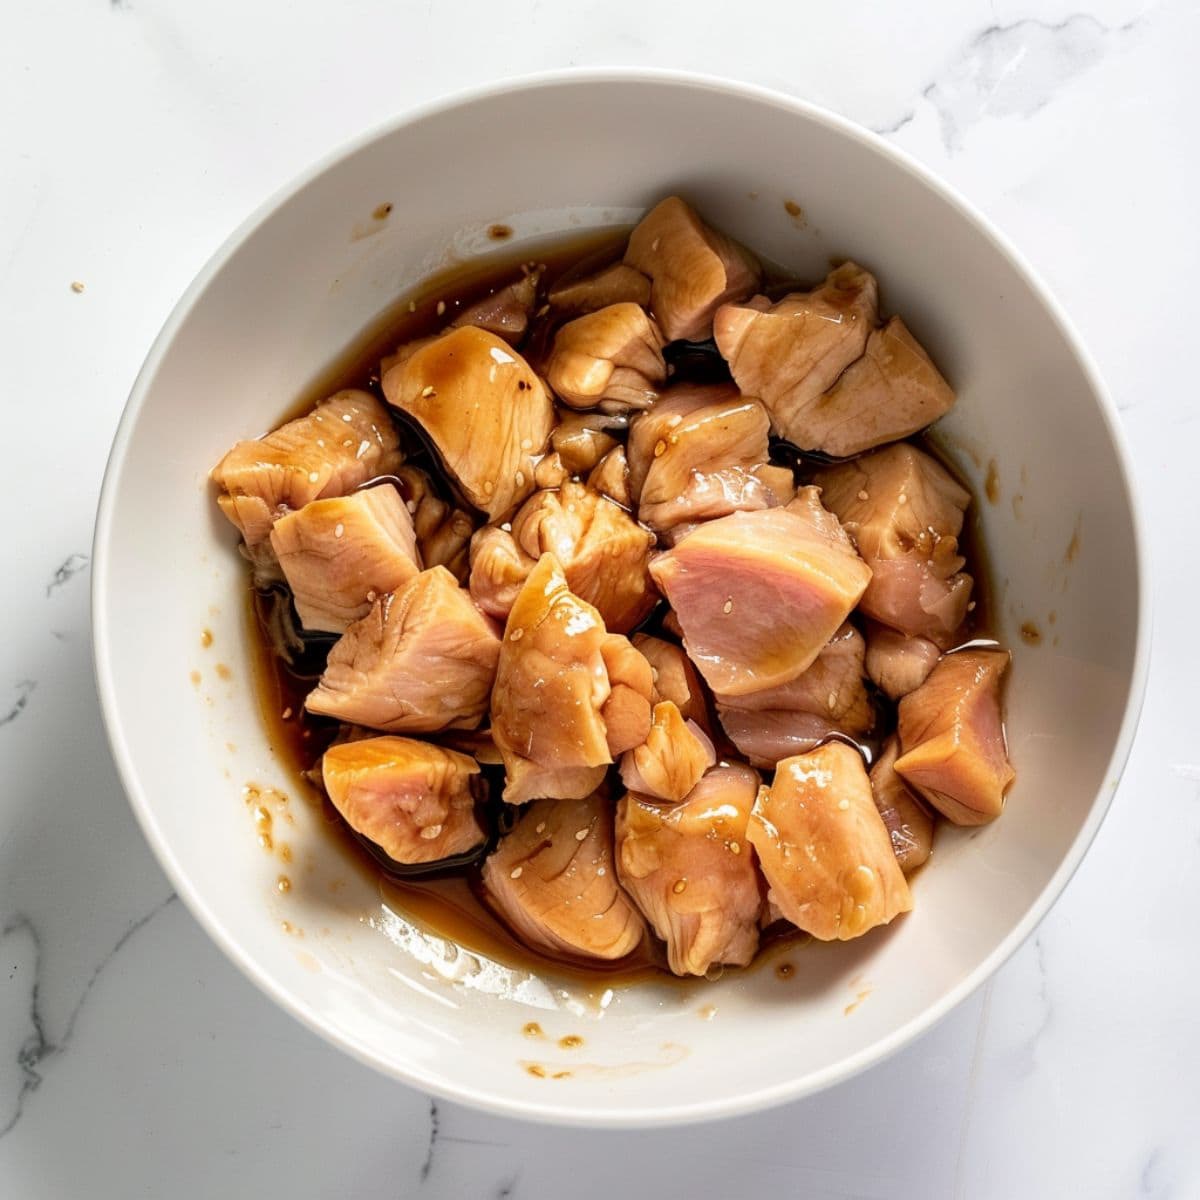 Bite size marinated chicken breast in a white bowl.